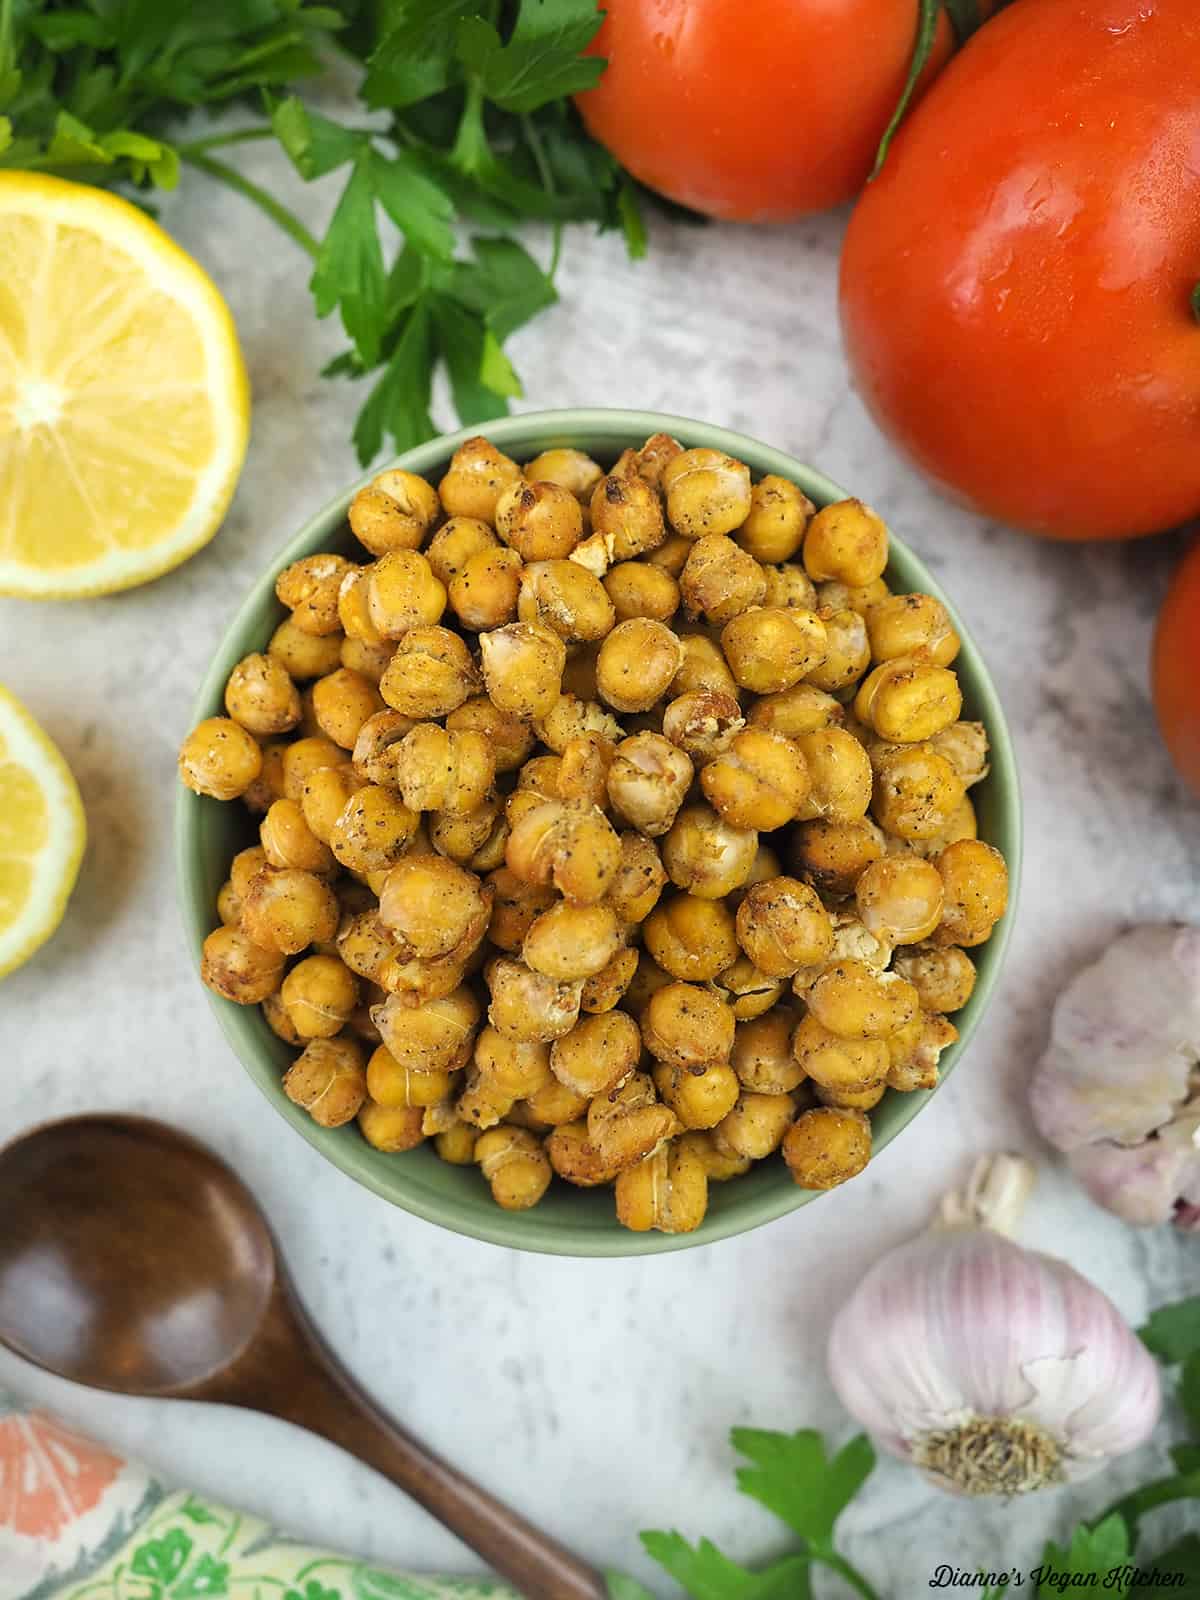 bowl of roasted chickpeas overhead with tomato, lemon, and garlic